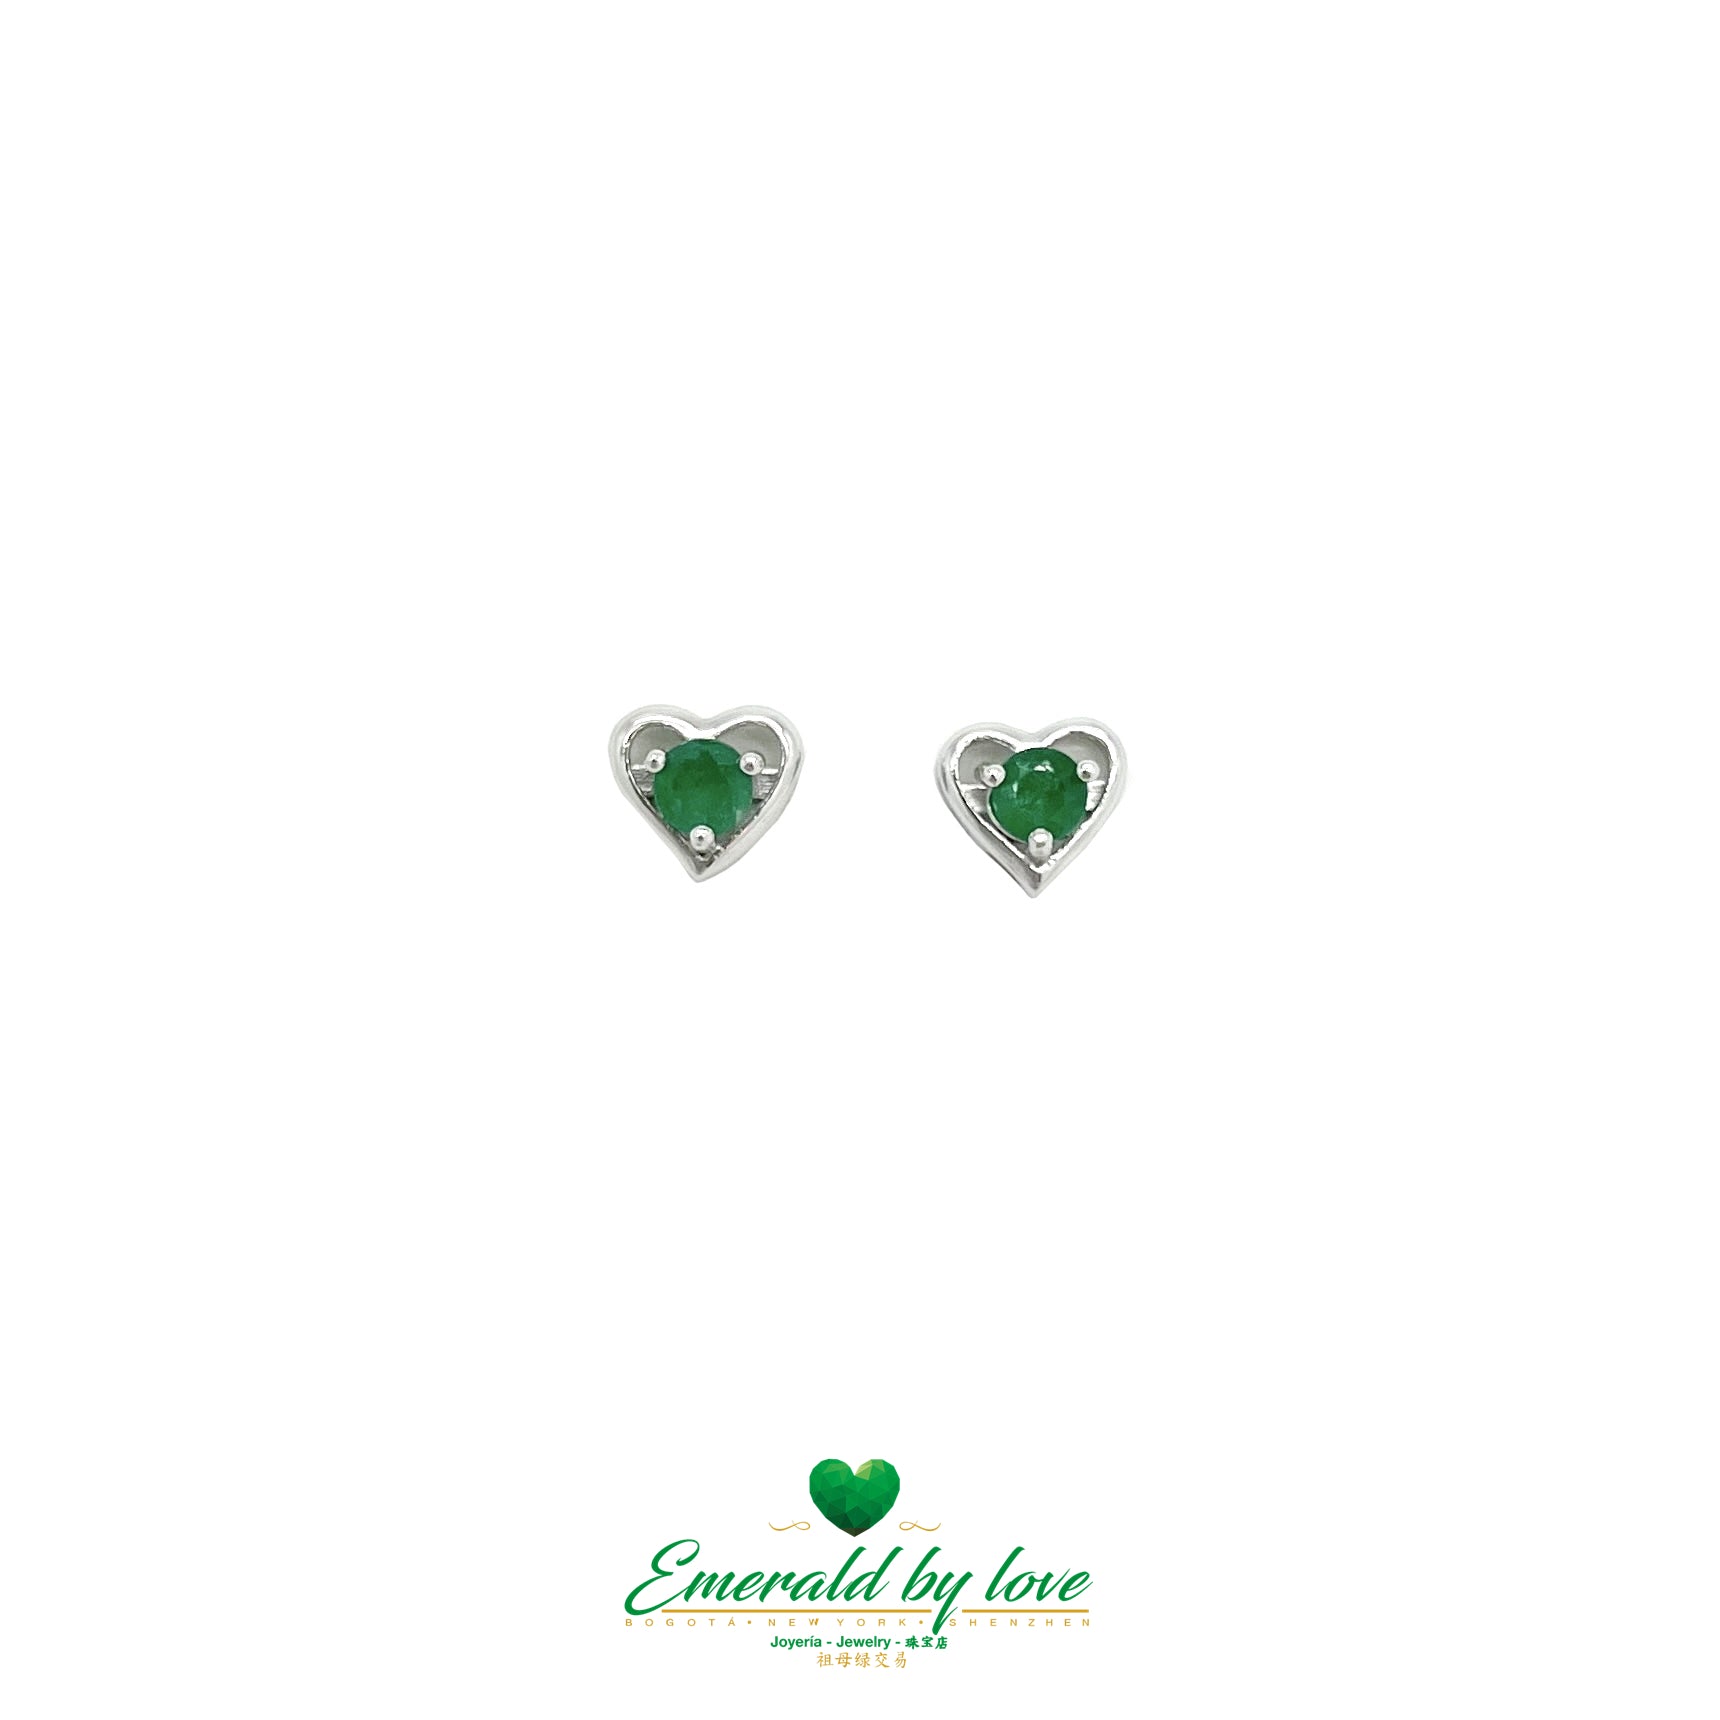 Heart-shaped Stud Earrings with Round Central Emerald